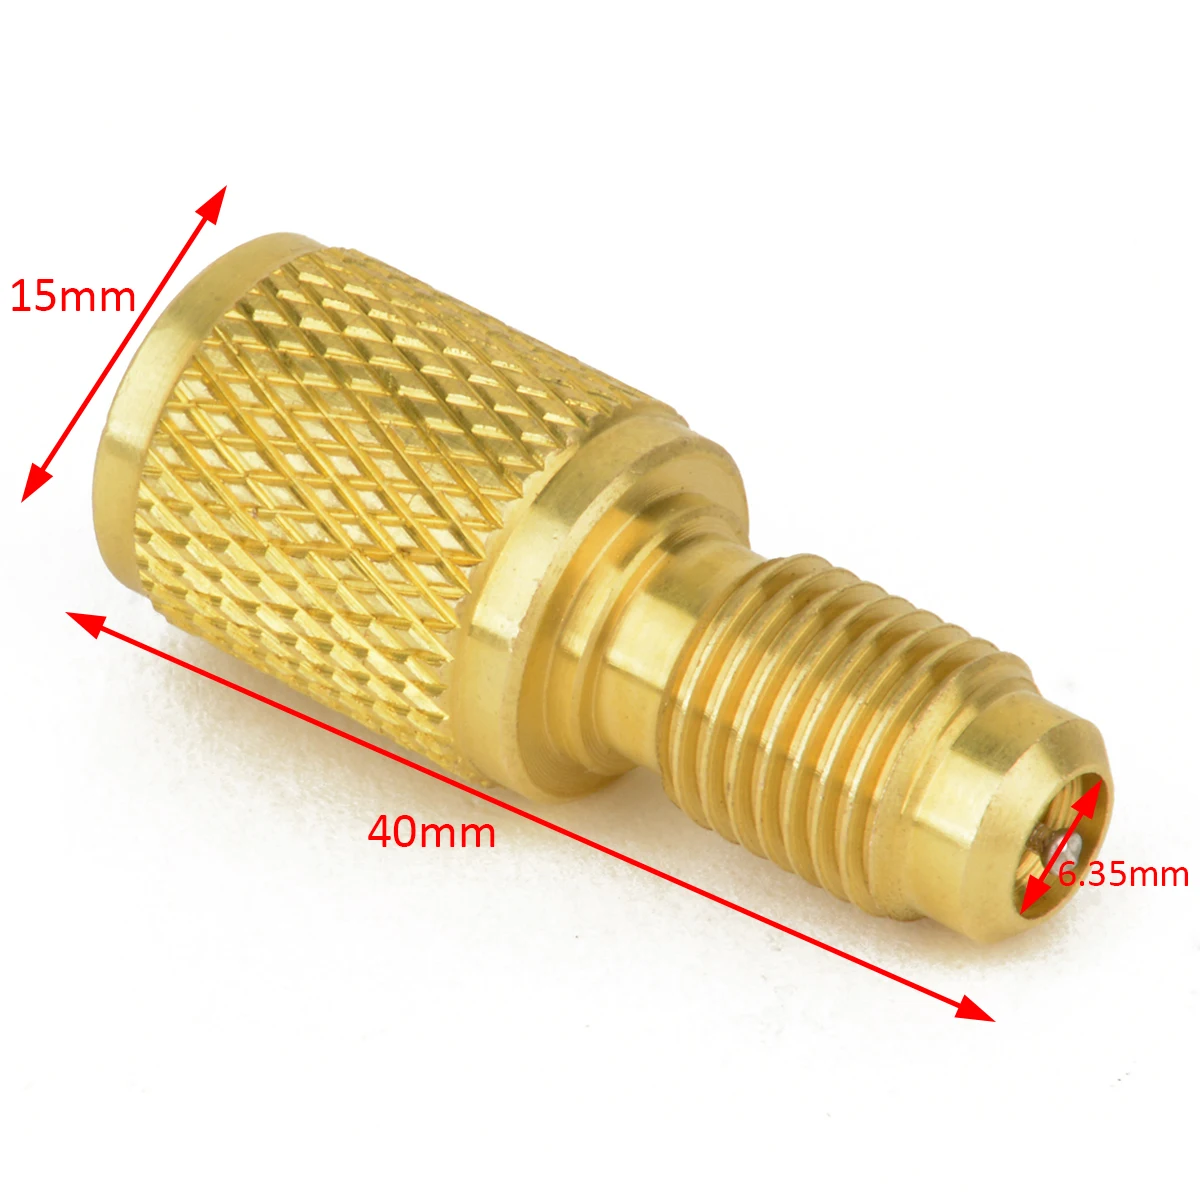 A/C R134a Brass Fitting Adapter 1/4” Male to 1/2” Female with Valve Core New 